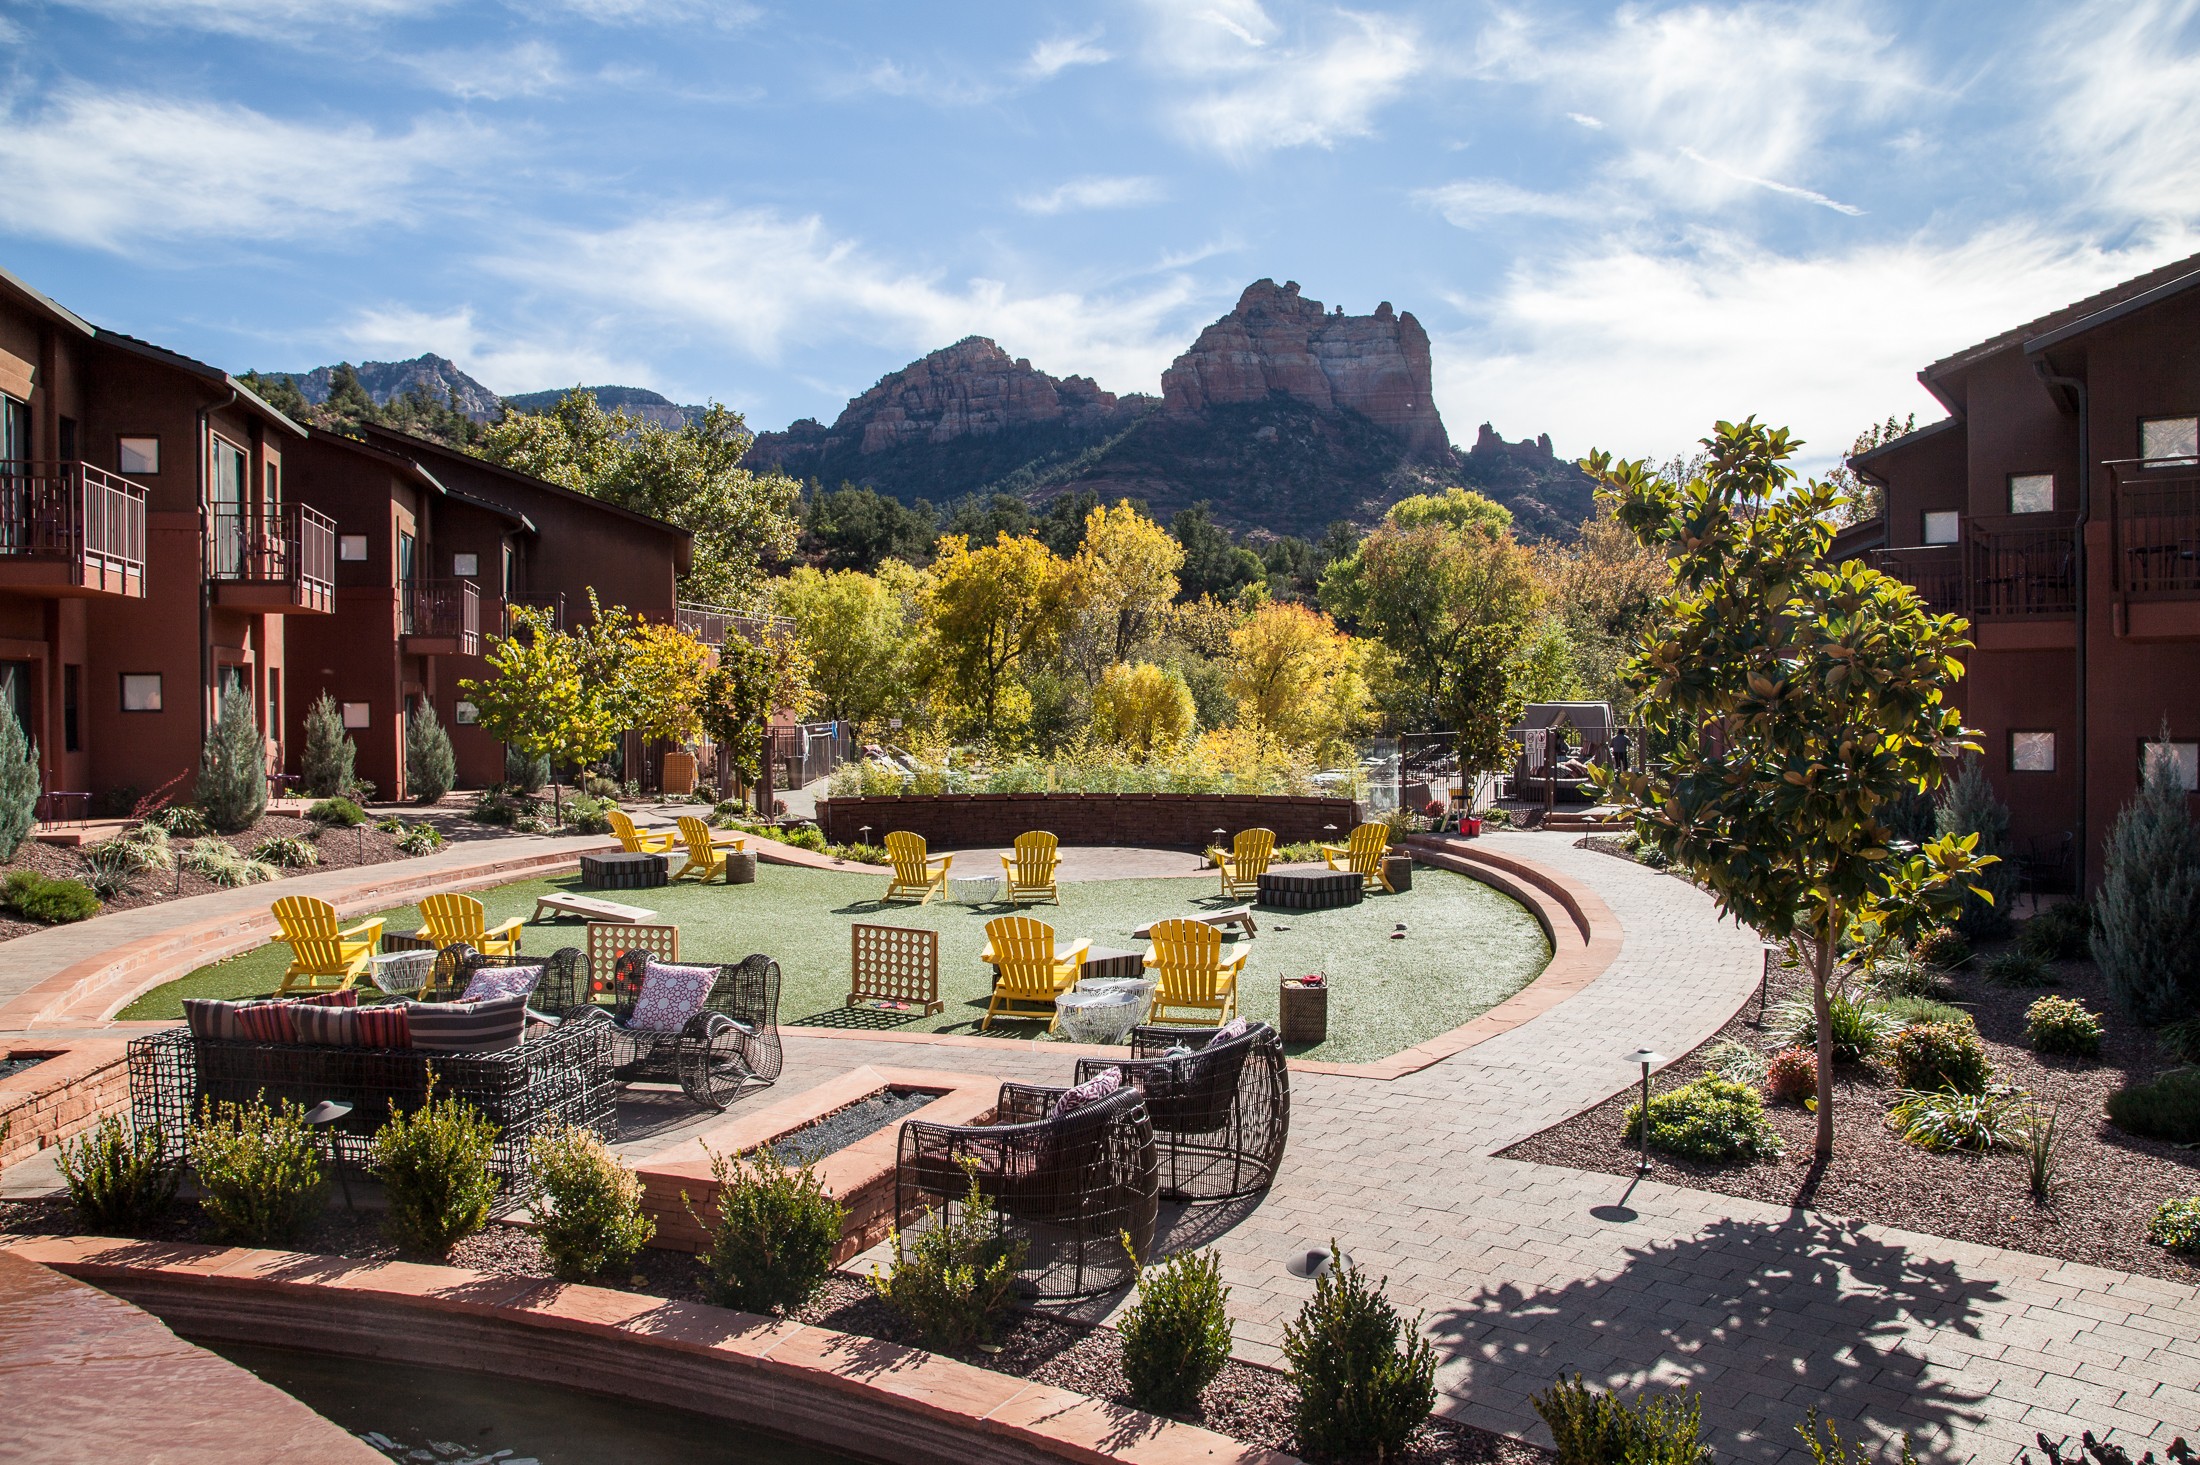 A renovation project at Amara Resort and Spa in Sedona Ariz aims to blur the line between indoors and outdoors